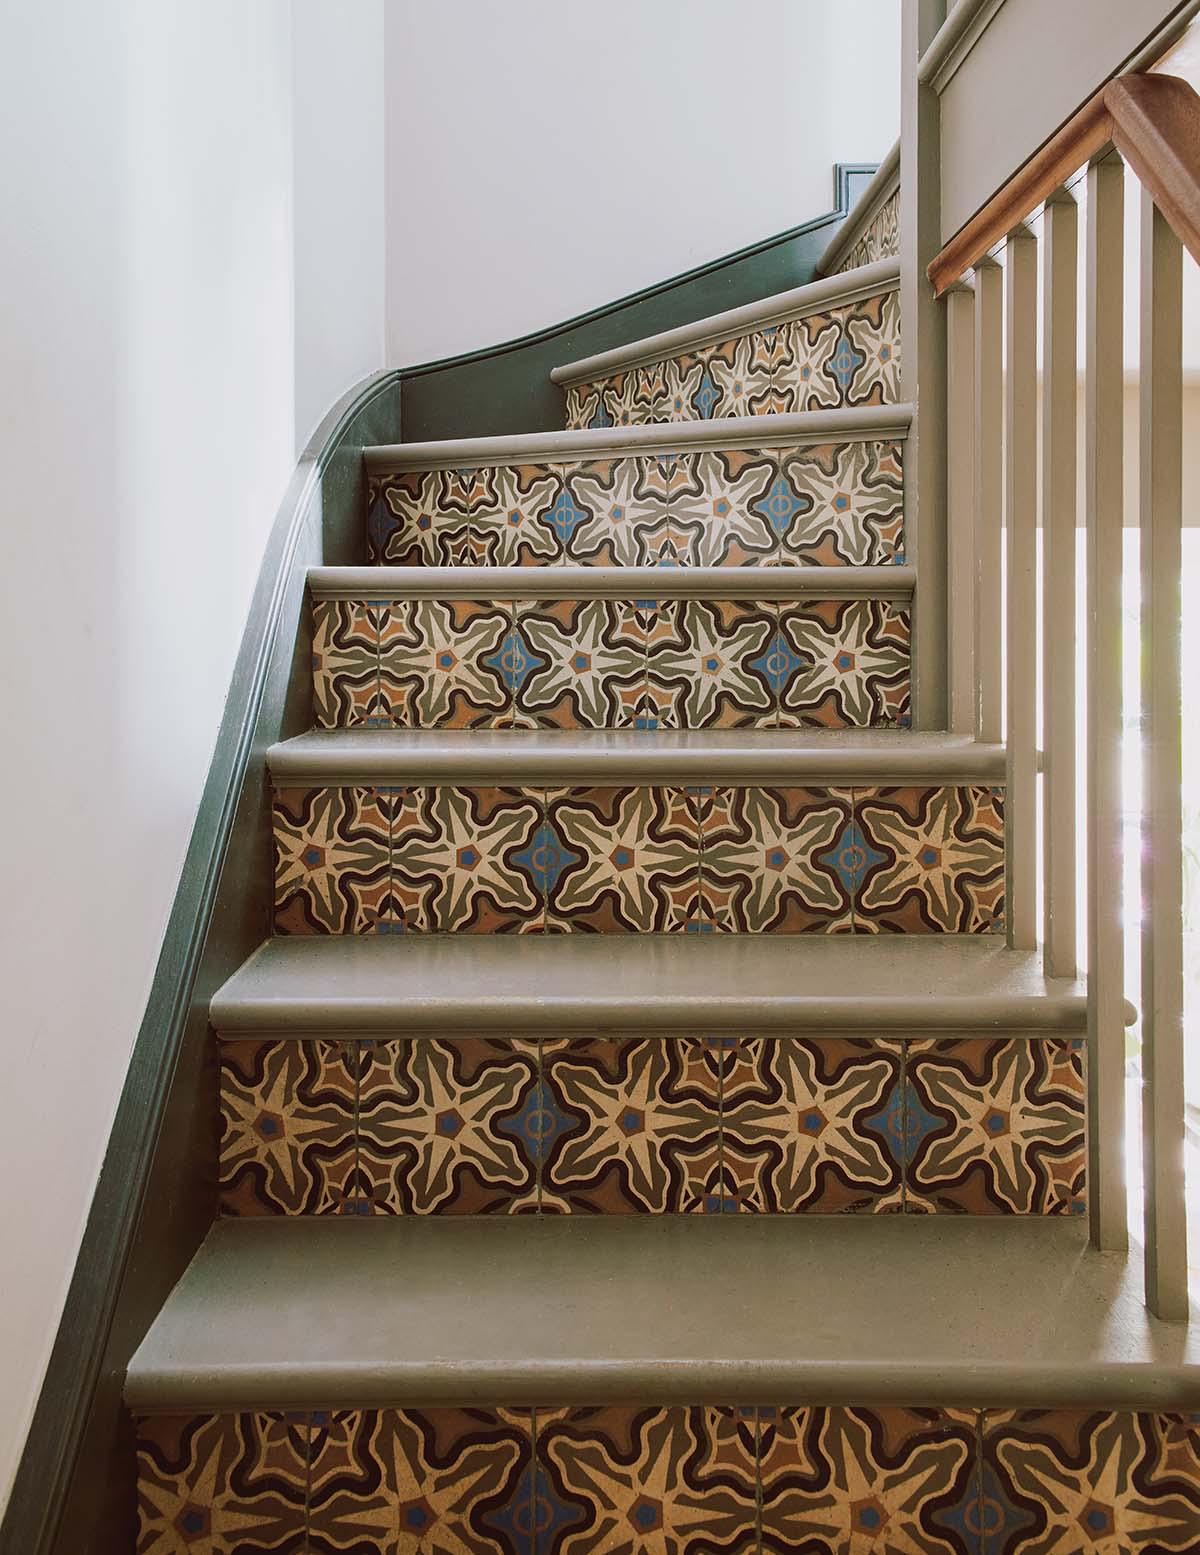 Tiled staircase in period home